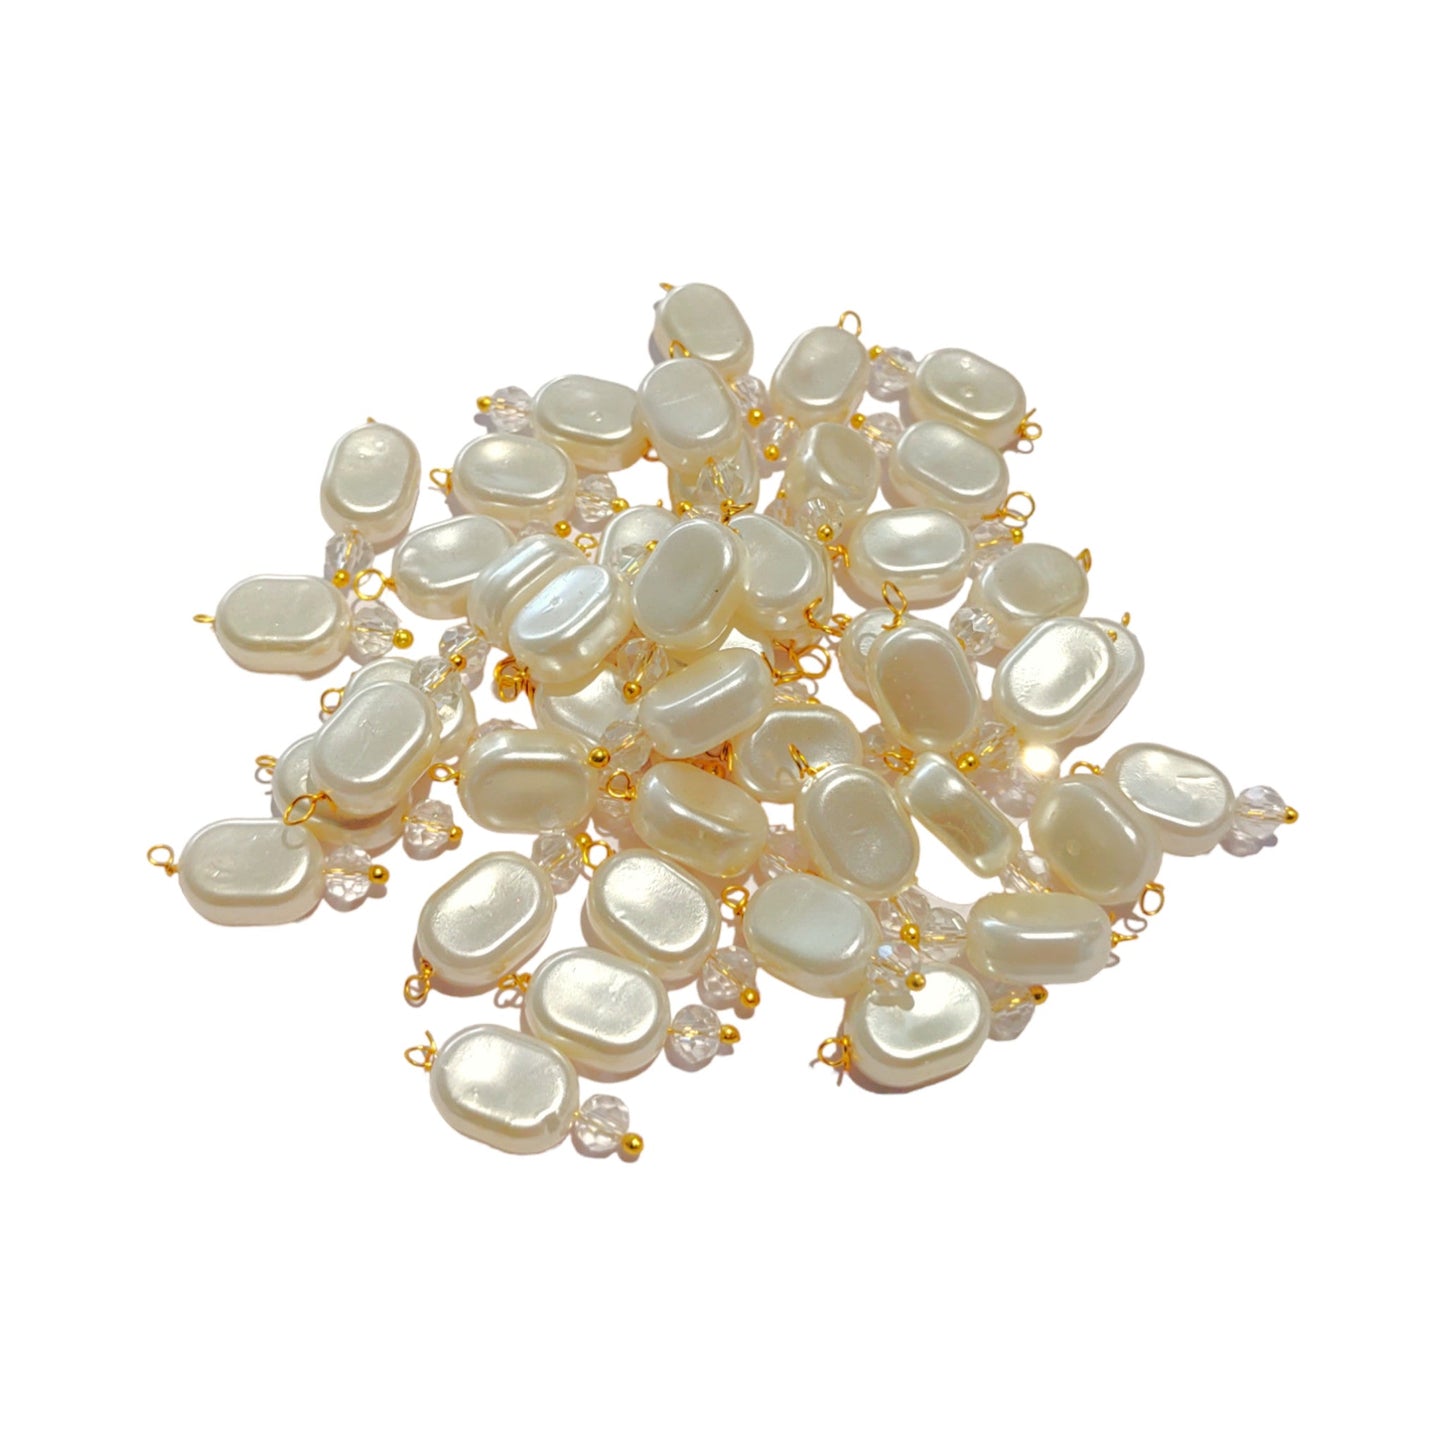 Indian Petals 100Pcs Colored Plastic Bead with Crystal Ball Drop for Craft Décor or Jewelry Making, 8x12mm, Ivory